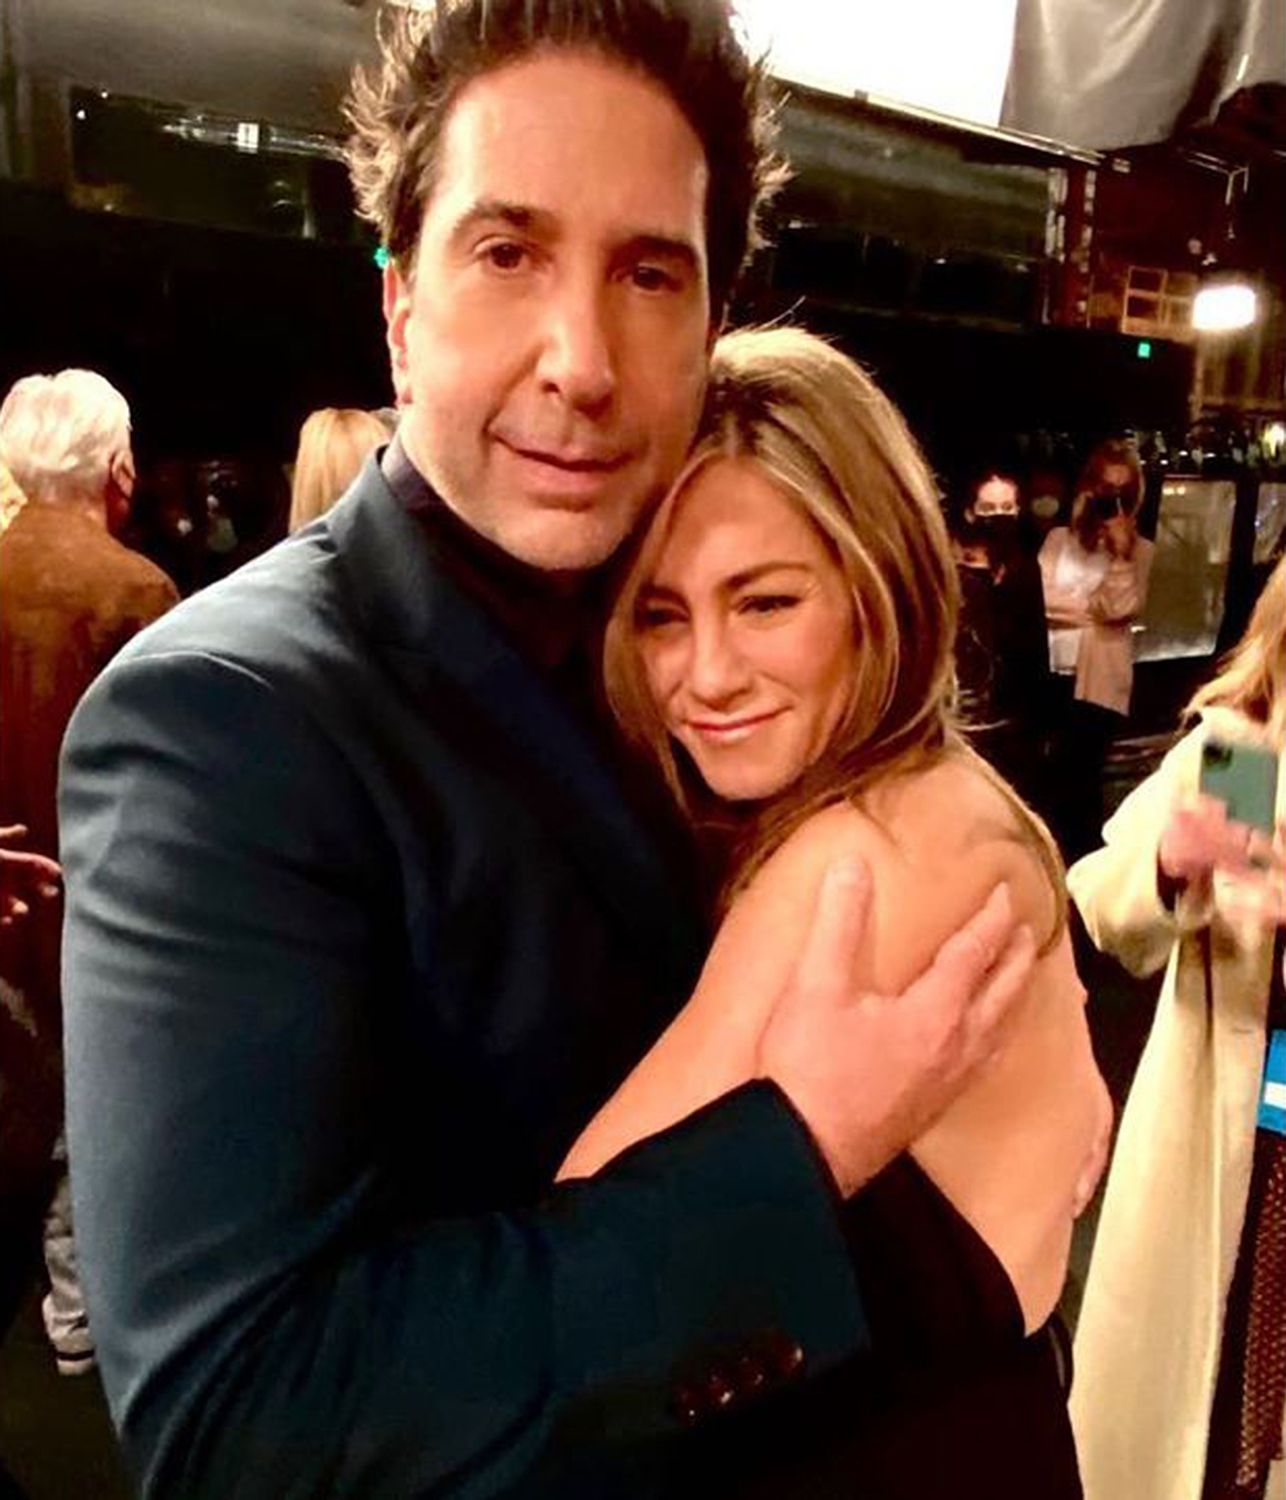 Jennifer Aniston and David Schwimmer dating post the Friends Reunion? Duo spotted spend quality time in L.A. together